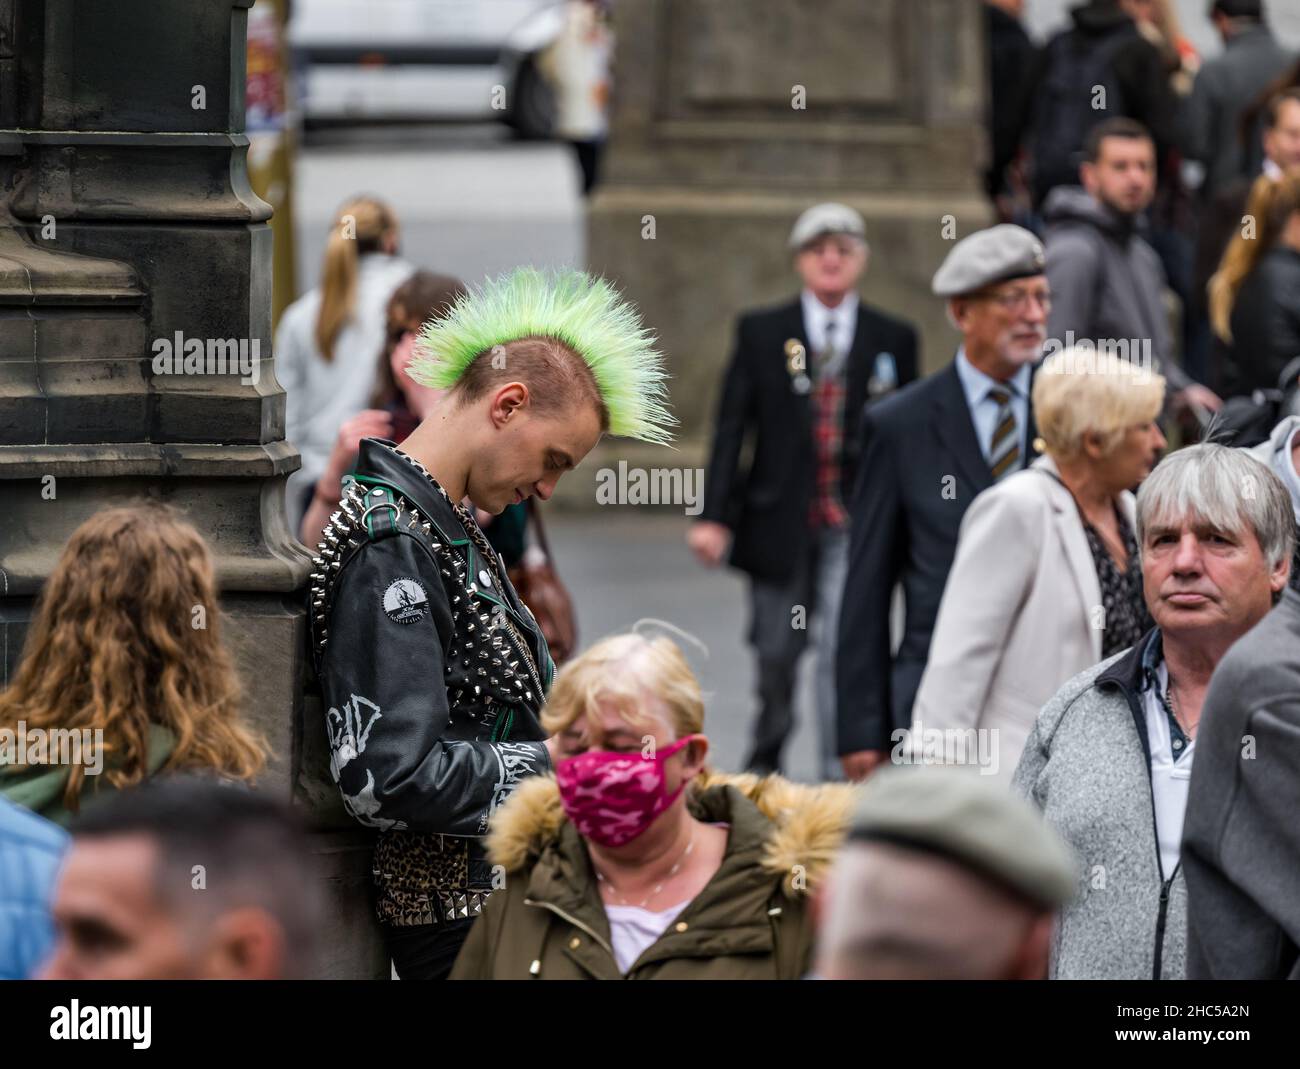 A young man looking at his phone with a punk mohican hair style among a crowd of people, Royal Mile, Edinburgh, Scotland, UK Stock Photo